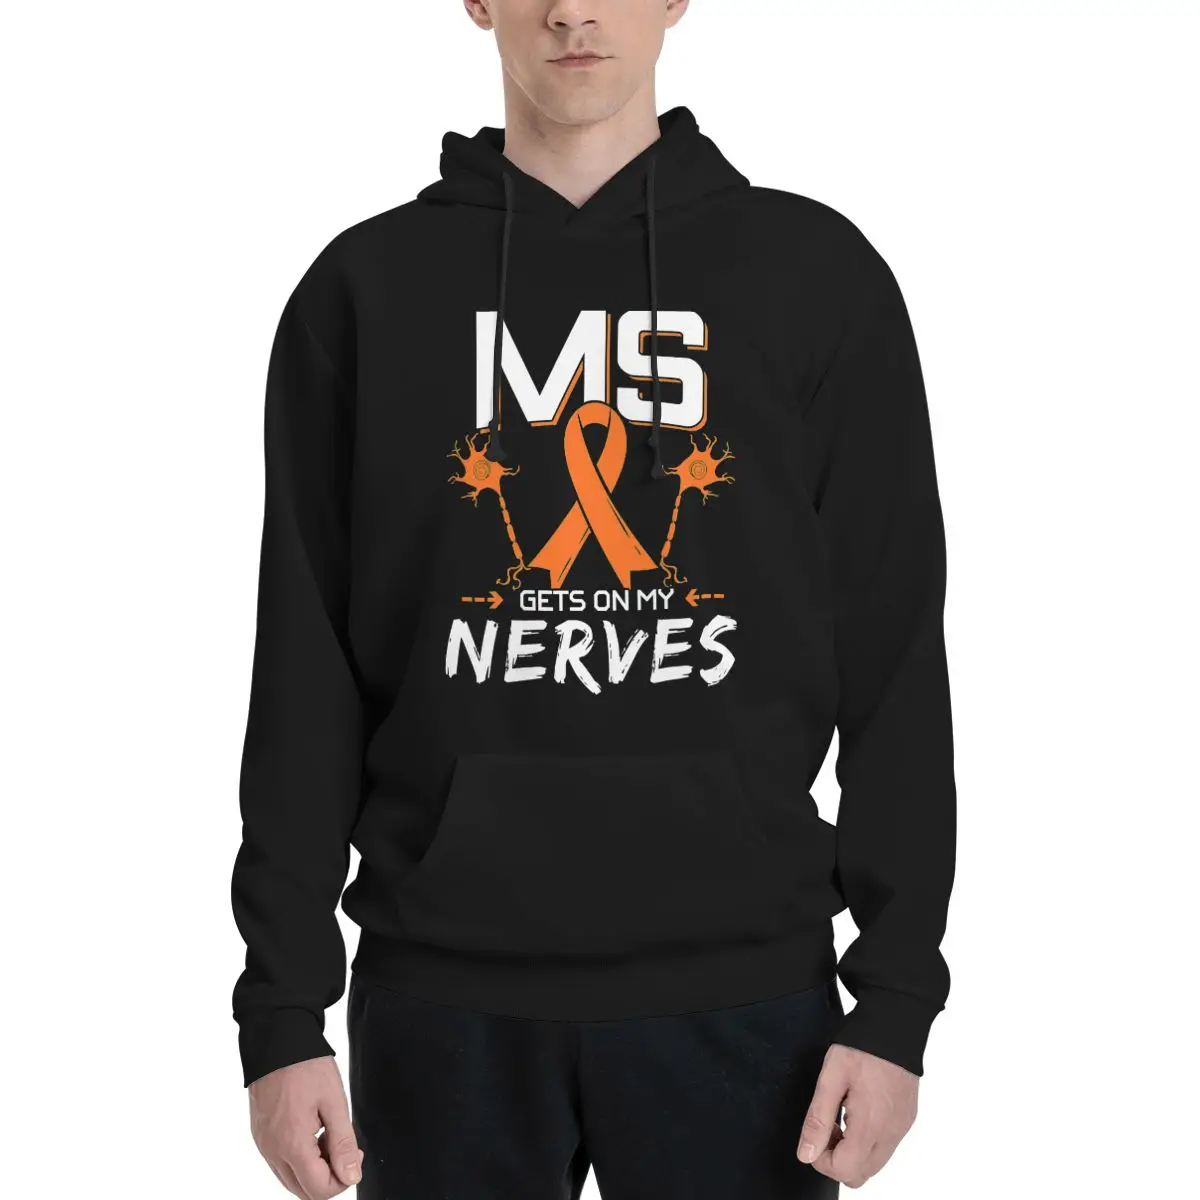 

Ms Gets On My Nerves Multiple Sclerosis Awareness Survivor Polyester Hoodie Men's sweatershirt Warm Dif Colors Sizes